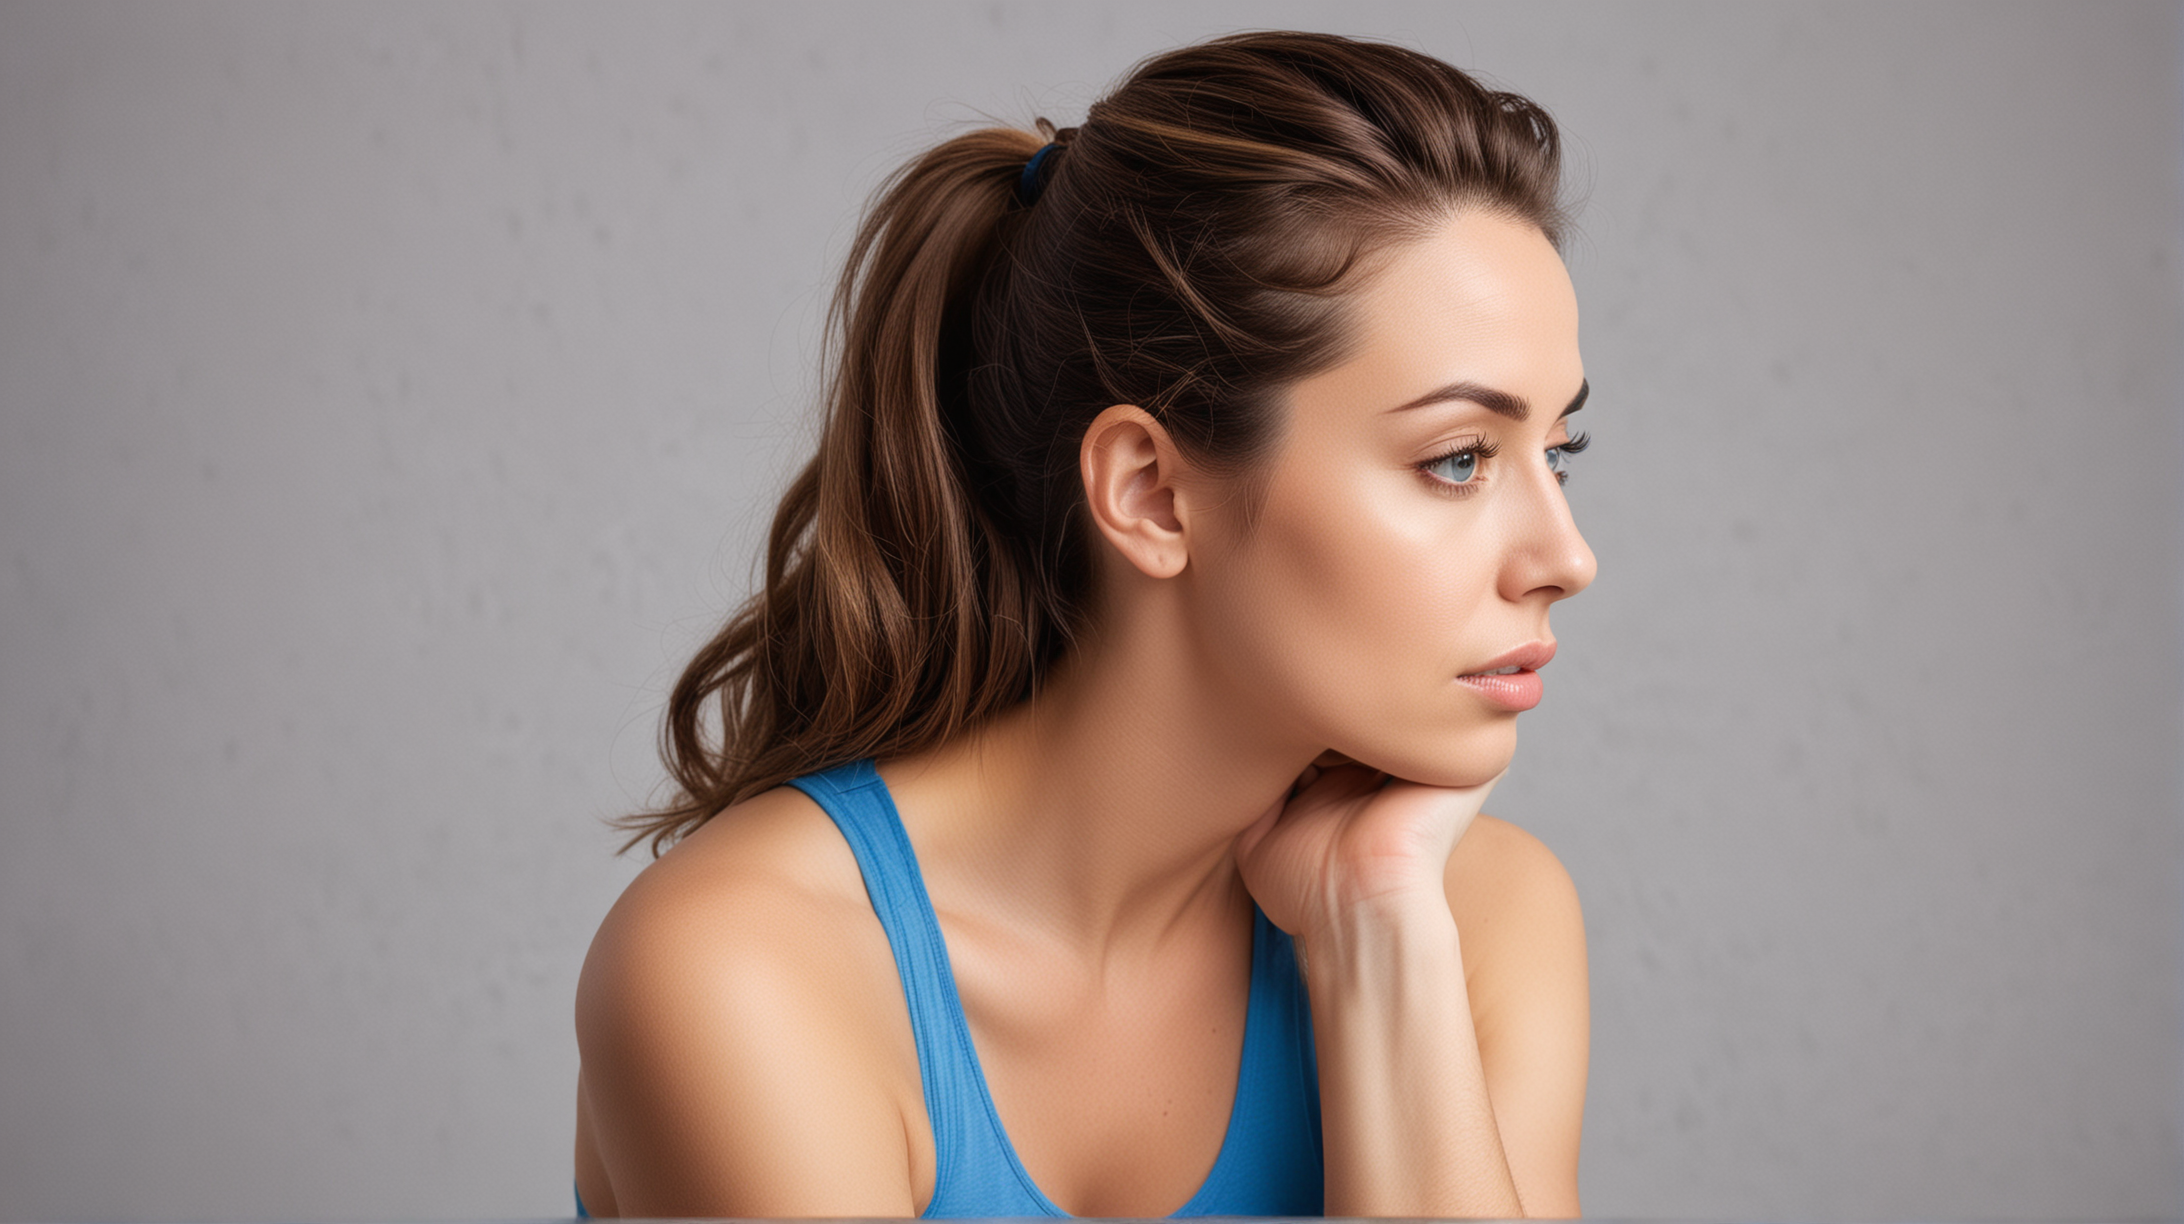 Contemplative Woman in Blue Tank Top Considering Glutathione Injections